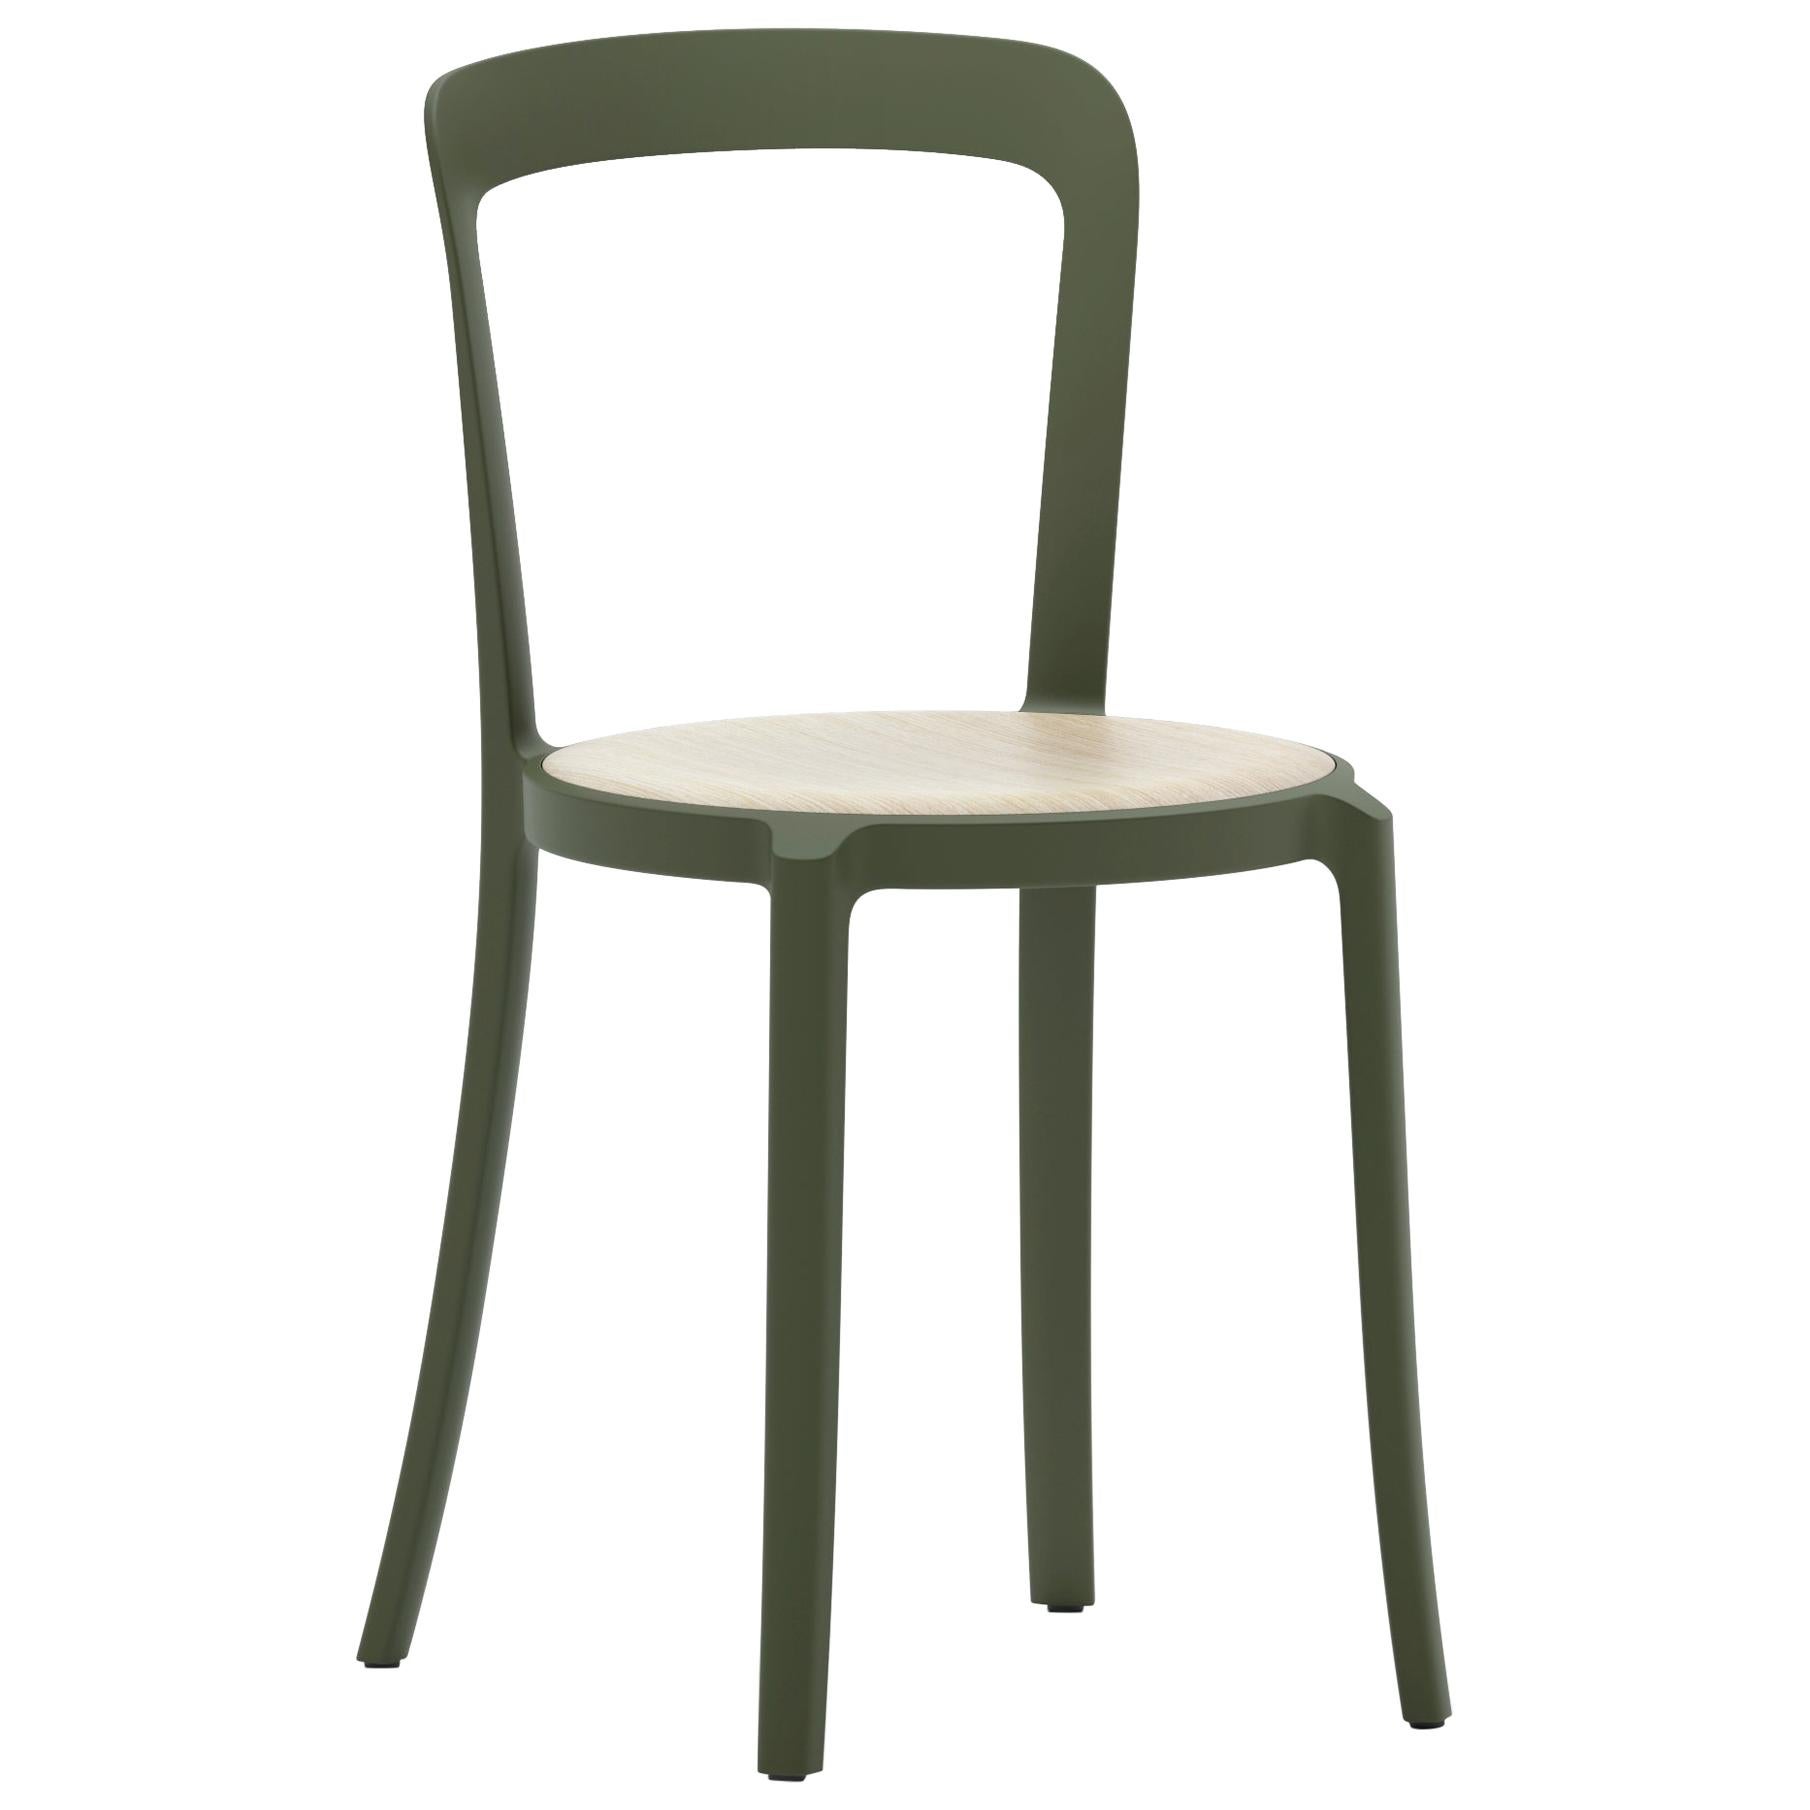 Emeco On & On Stacking Chair in Green with Oak Plywood seat by Barber & Osgerby For Sale